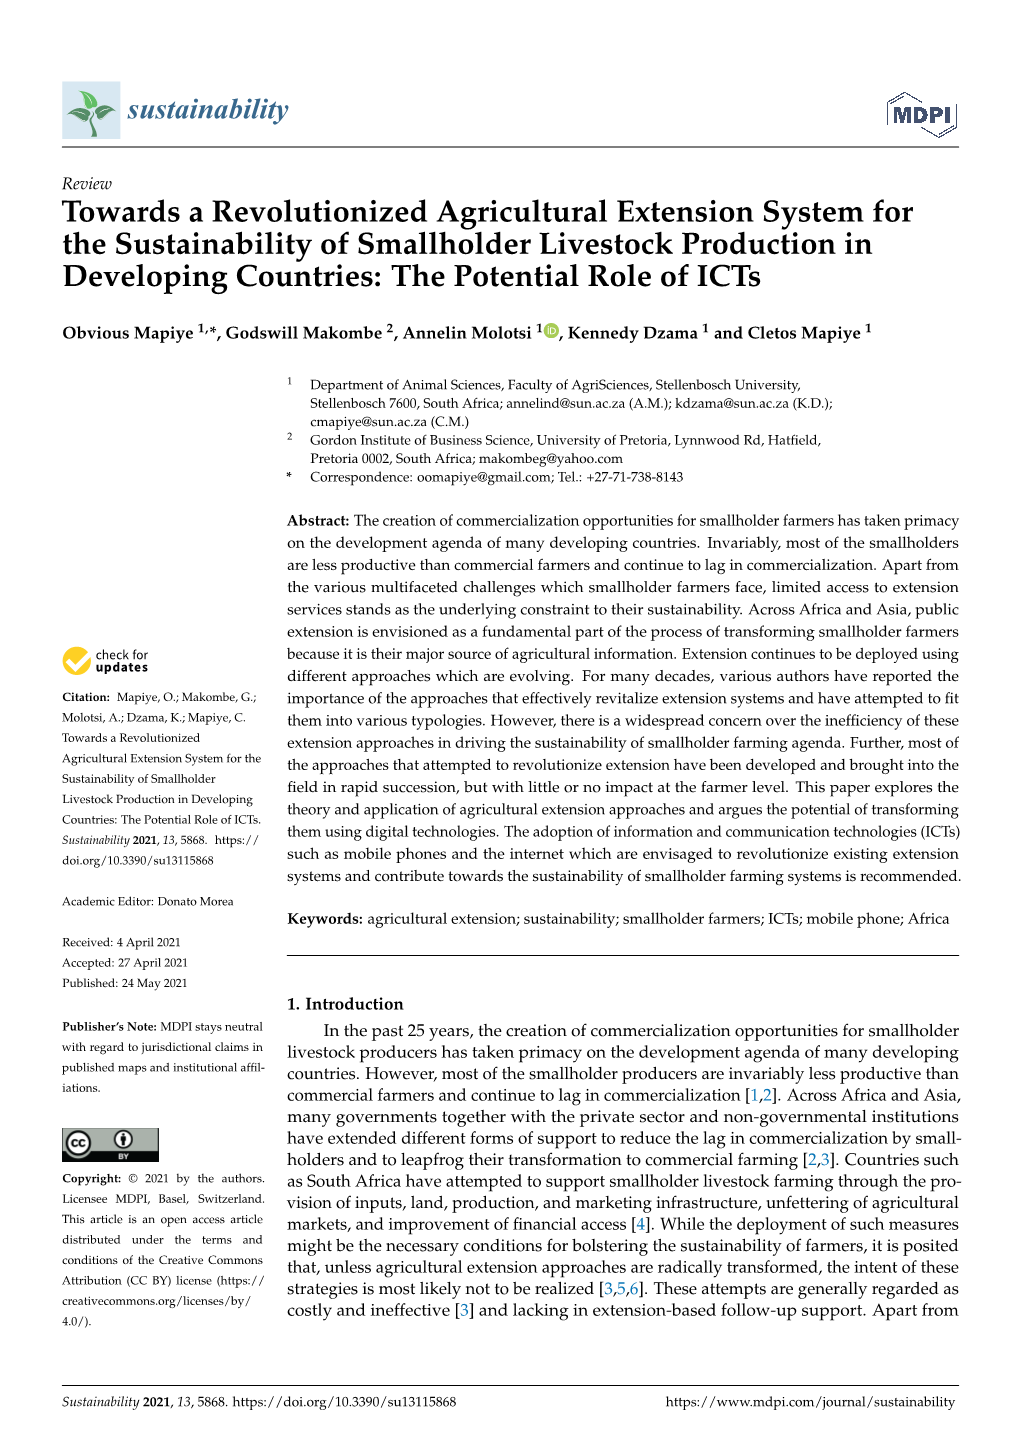 Towards a Revolutionized Agricultural Extension System for the Sustainability of Smallholder Livestock Production in Developing Countries: the Potential Role of Icts